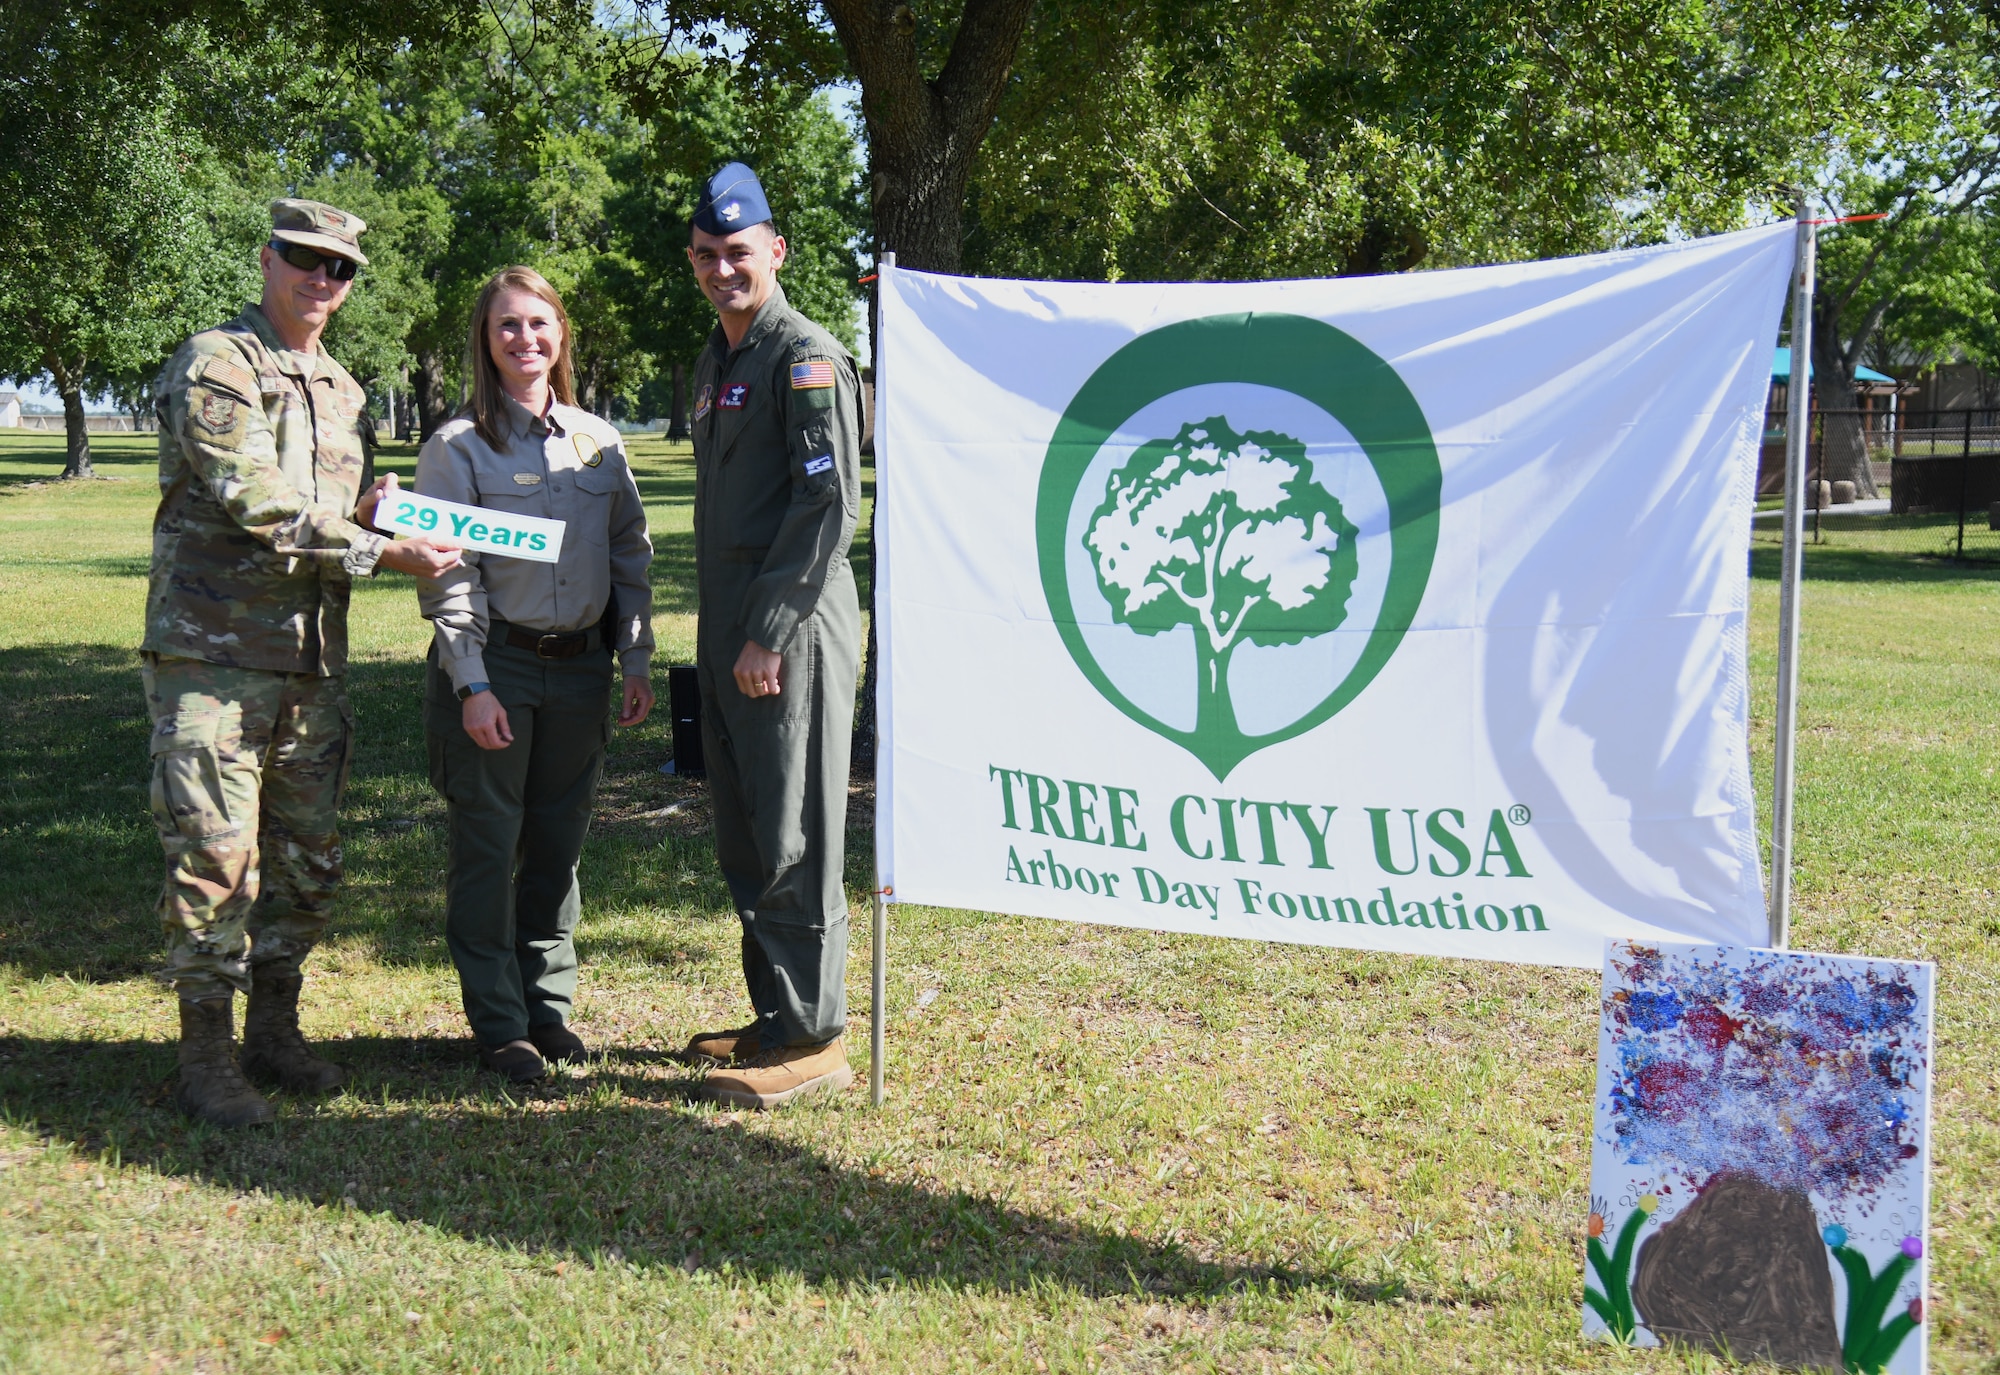 U.S. Air Force Col. William Hunter, 81st Training Wing commander, Meacham Harlow, Urban & Community Forestry Partnership coordinator, and Col. Stuart Rubio, 403rd Wing commander, pose for a photo with the Tree City USA flag during the Arbor Day Celebration outside of the child development center at Keesler Air Force Base, Mississippi, April 28, 2022. A tree planting ceremony also took place at the event. (U.S. Air Force photo by Kemberly Groue)